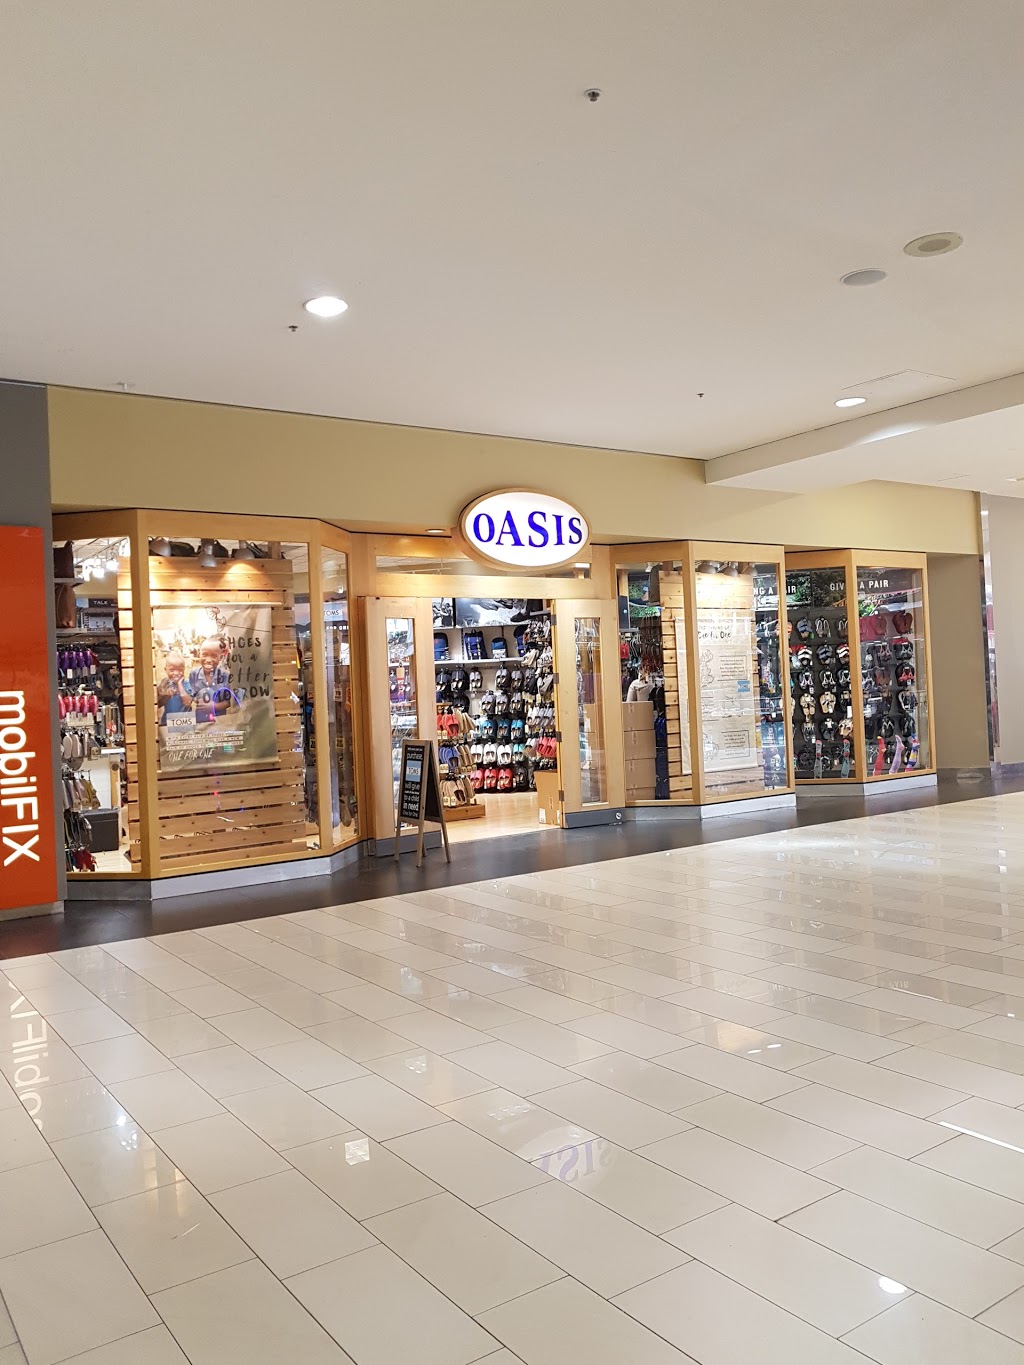 Oasis | shoe store | 8882 170 St NW, Edmonton, AB T5T 4J2, Canada | 7804811329 OR +1 780-481-1329